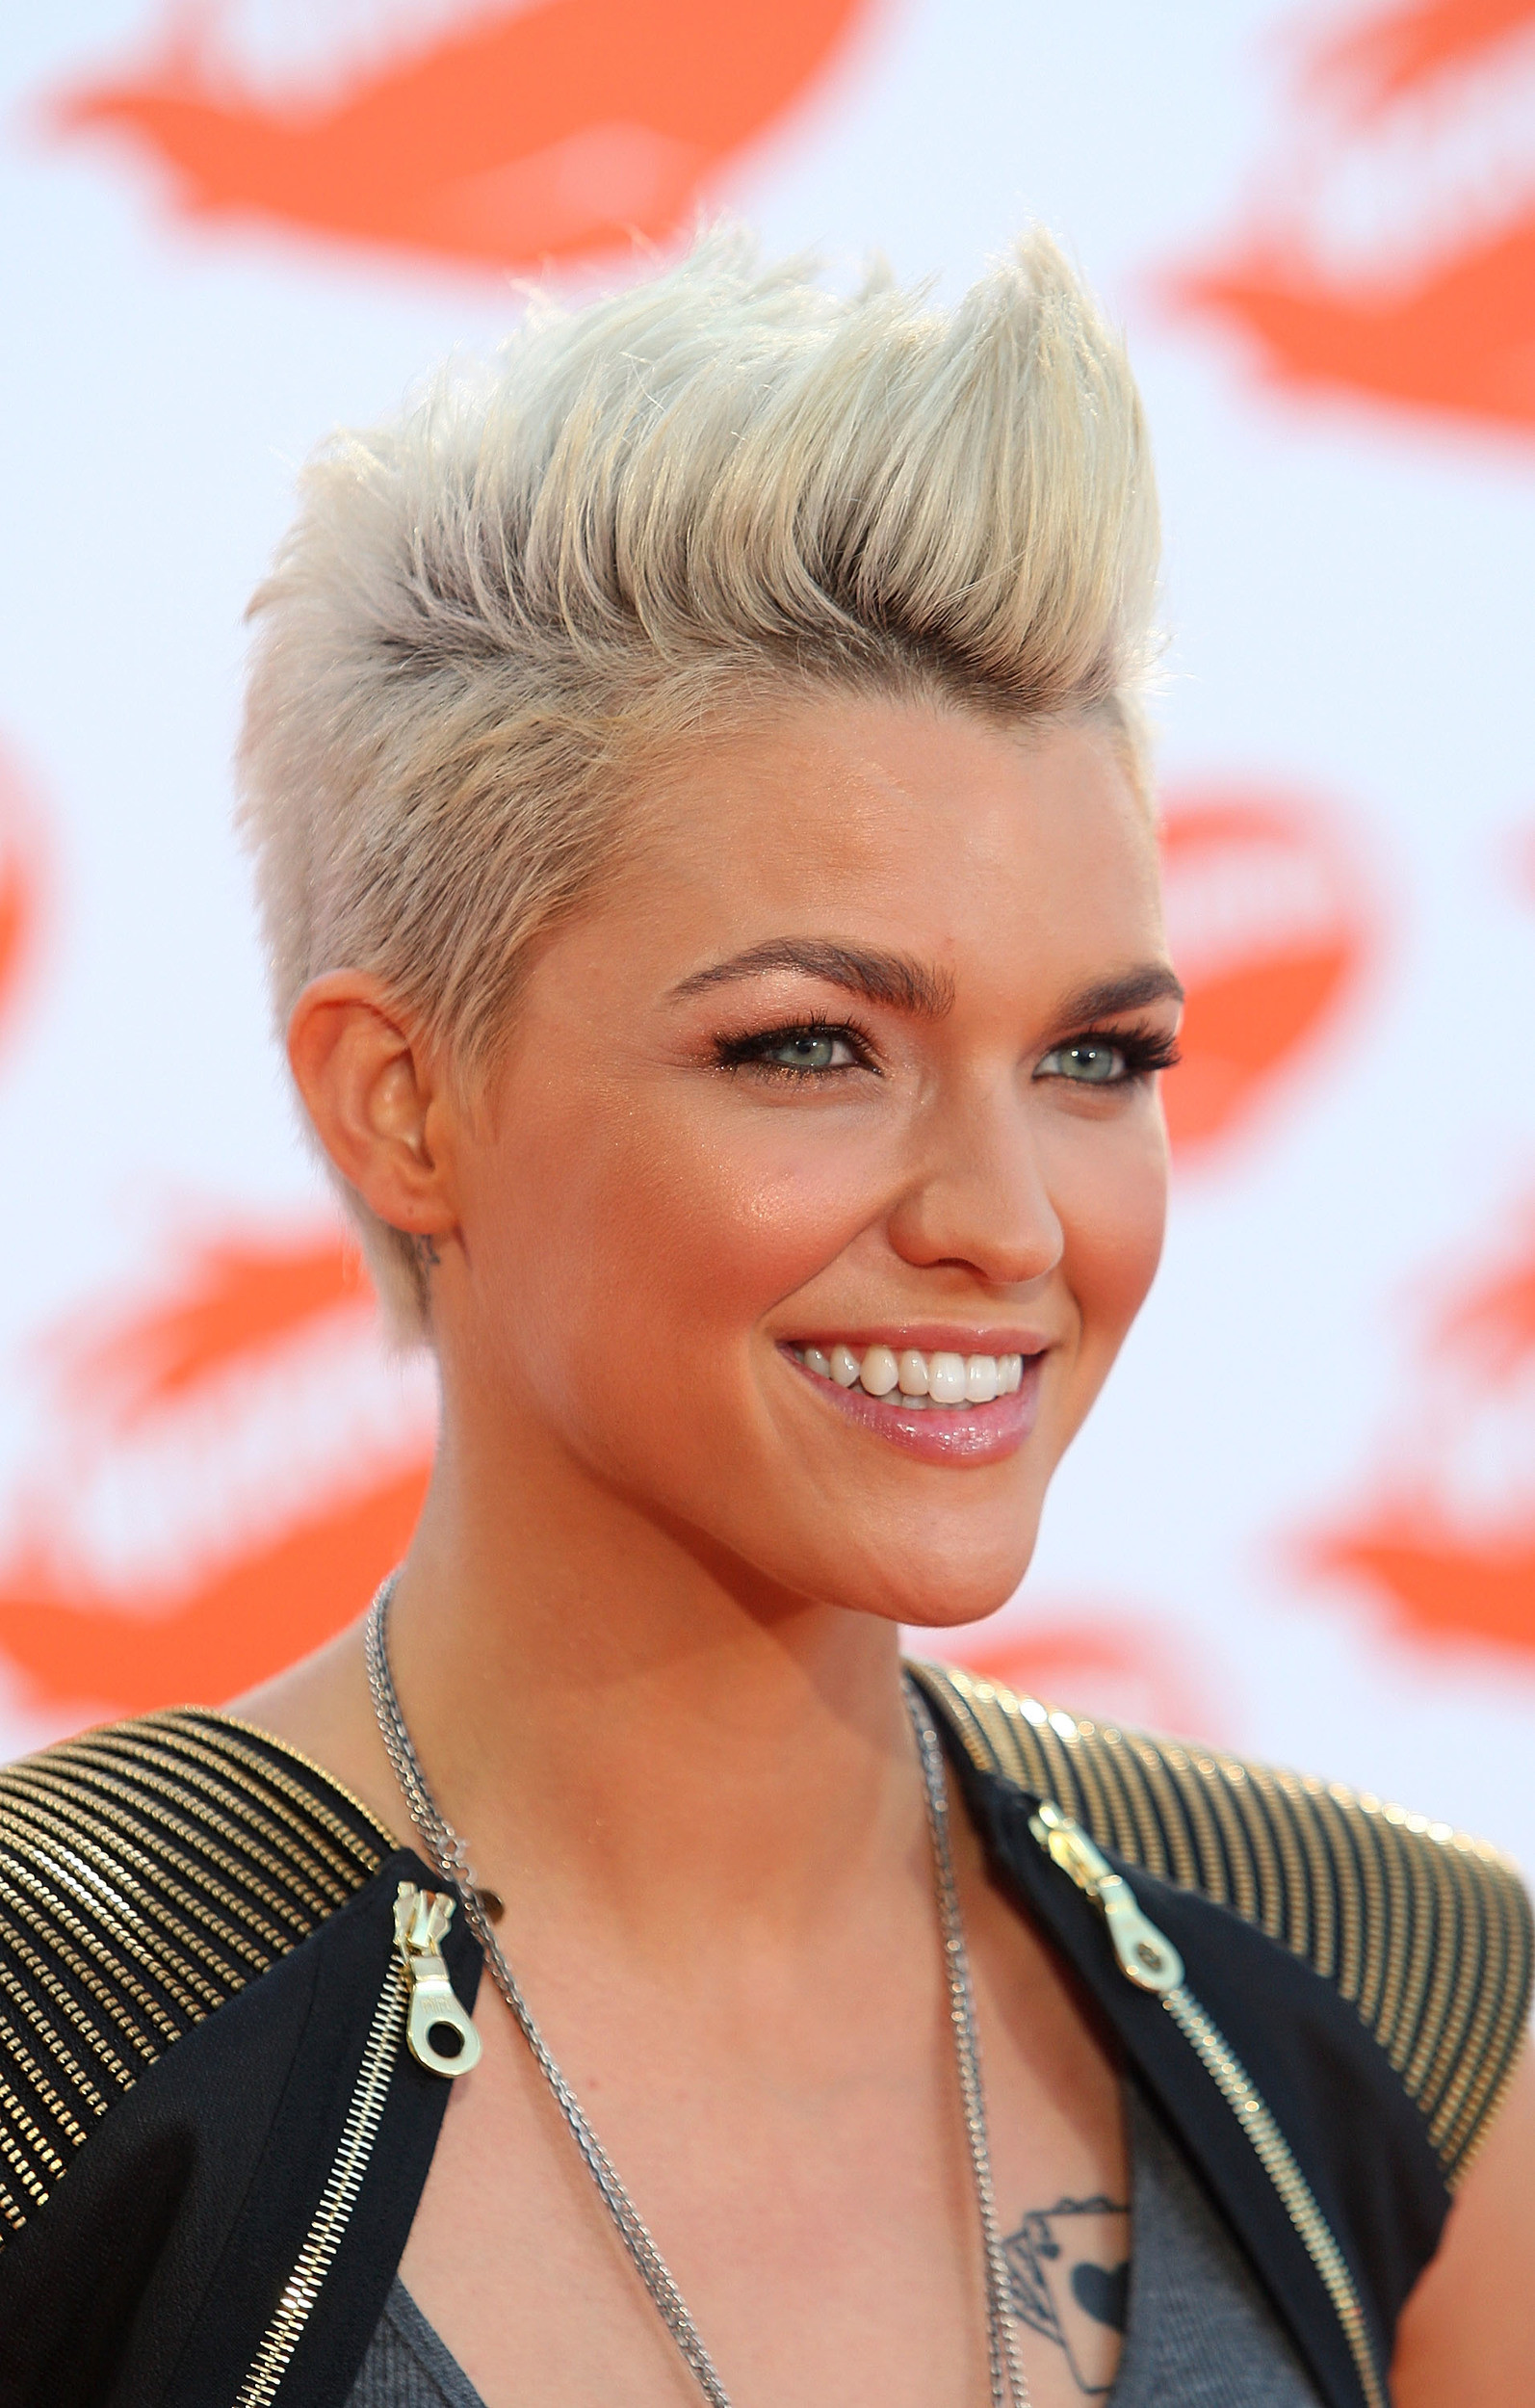 Mohawk Hairstyles For Long Hair
 15 Gorgeous Mohawk Hairstyles for Women In 2020